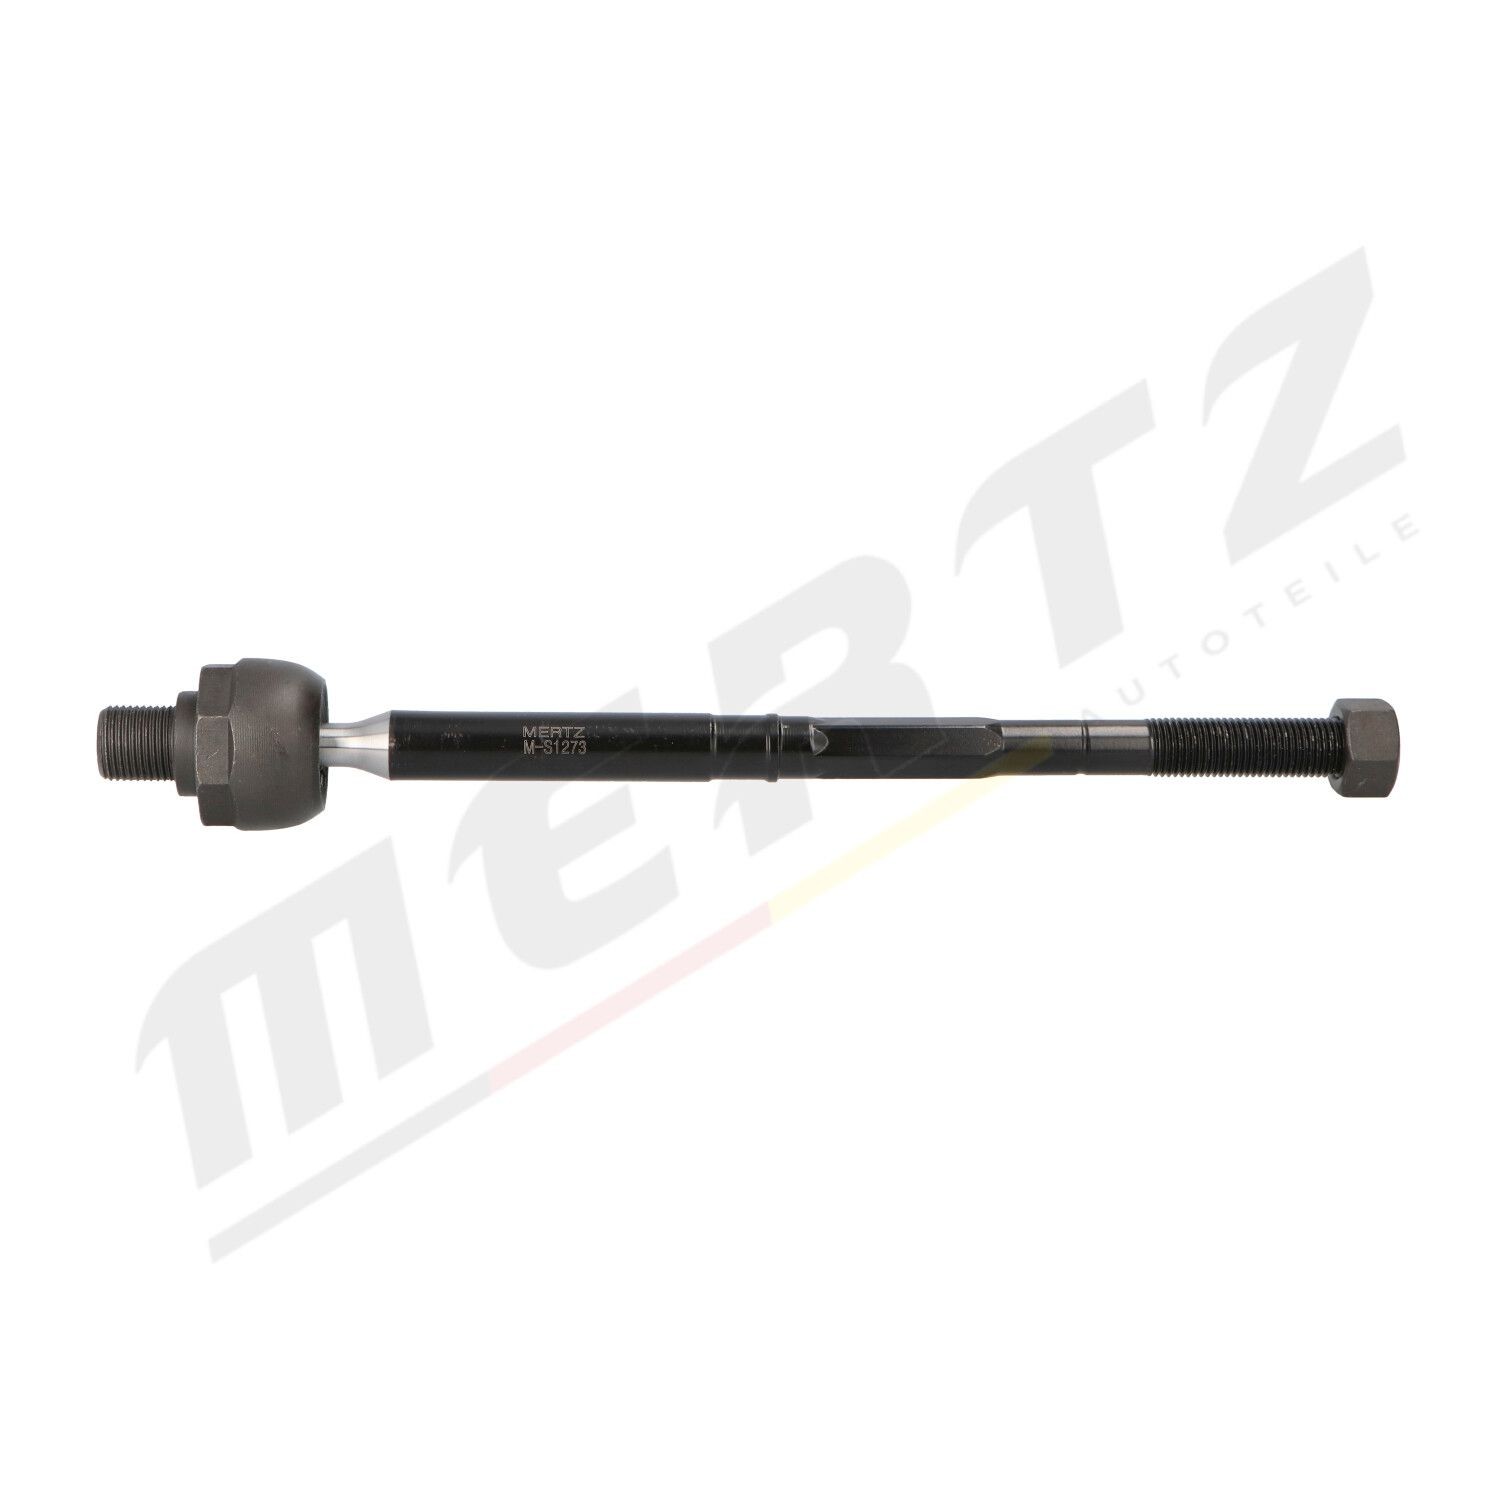 MERTZ Front Axle Left, Front Axle Right, 257 mm, with nut Length: 257mm Tie rod axle joint M-S1273 buy